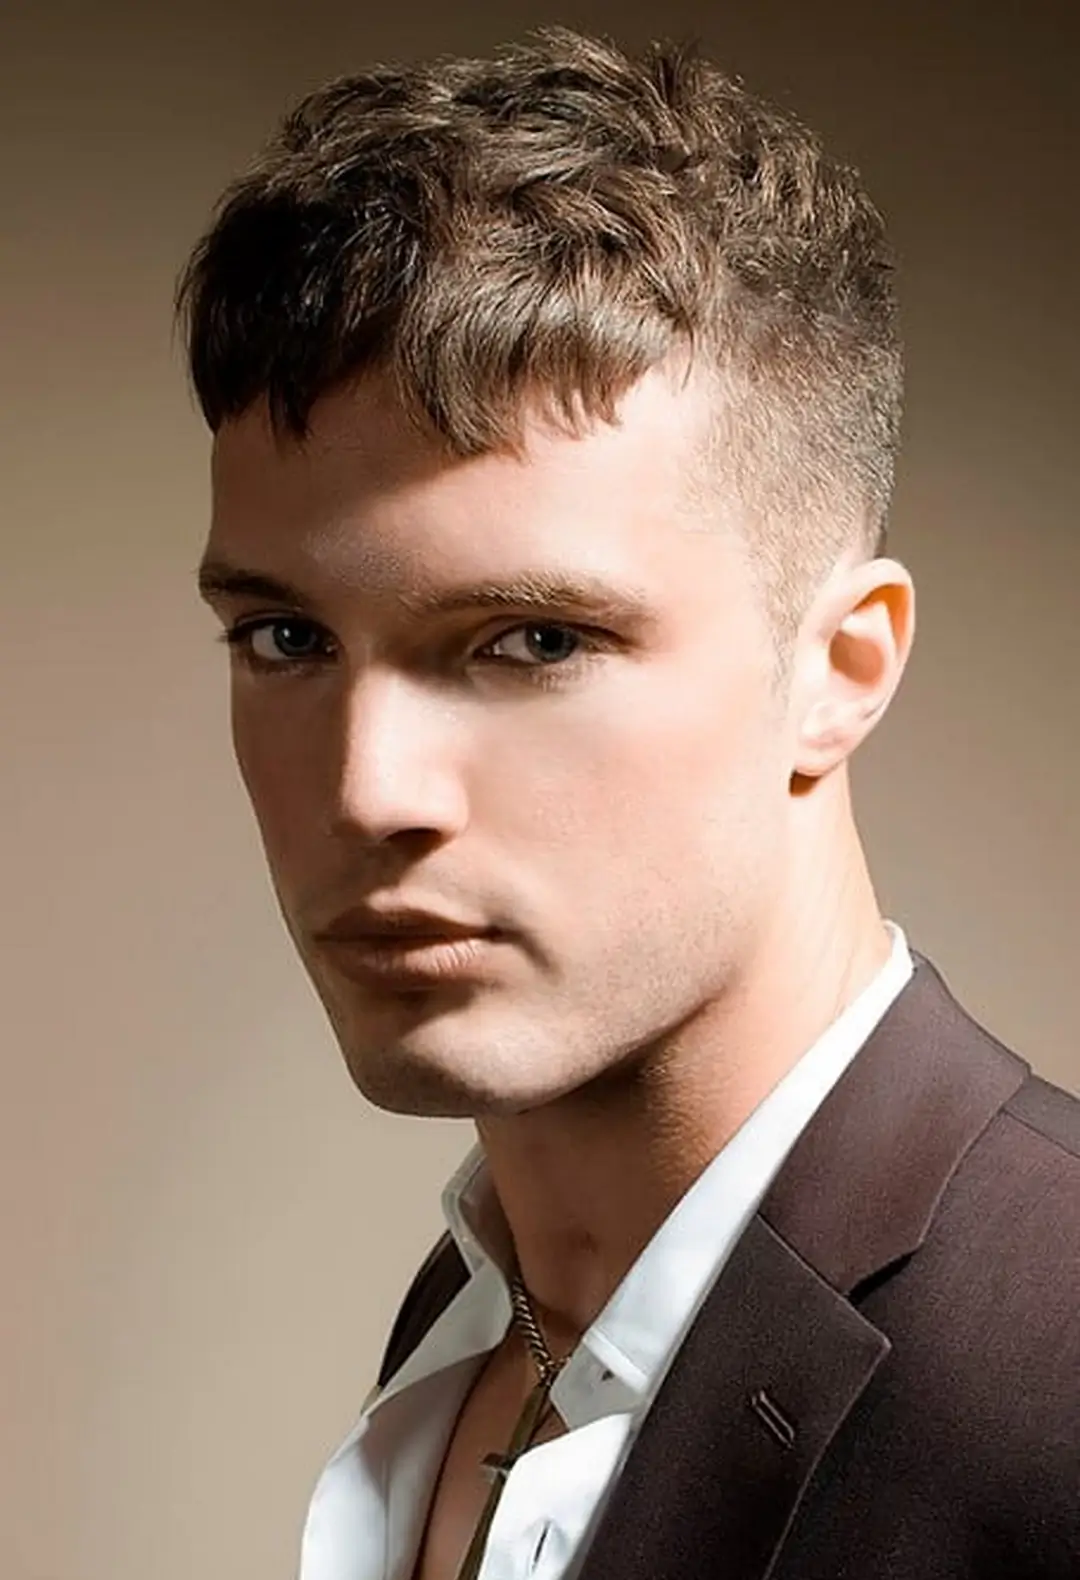 Men's Caesar Haircut from Fifth Ave Barber Shop in Midtown NYC